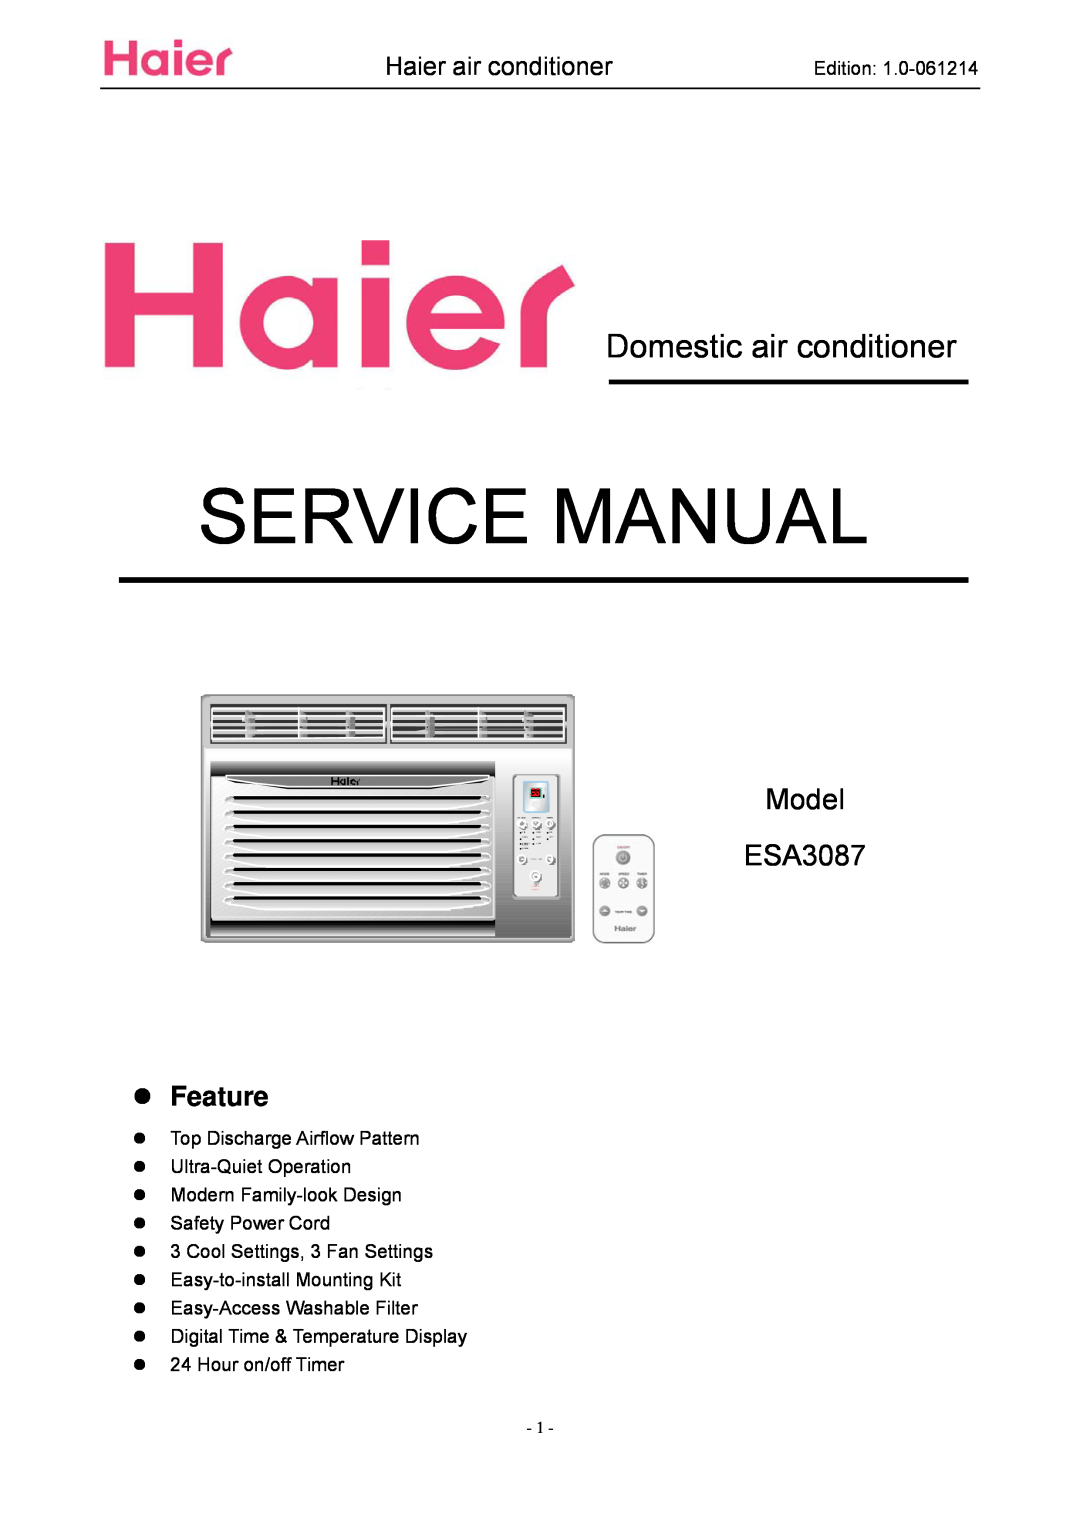 Haier service manual Domestic air conditioner, Model ESA3087, zFeature, Haier air conditioner 